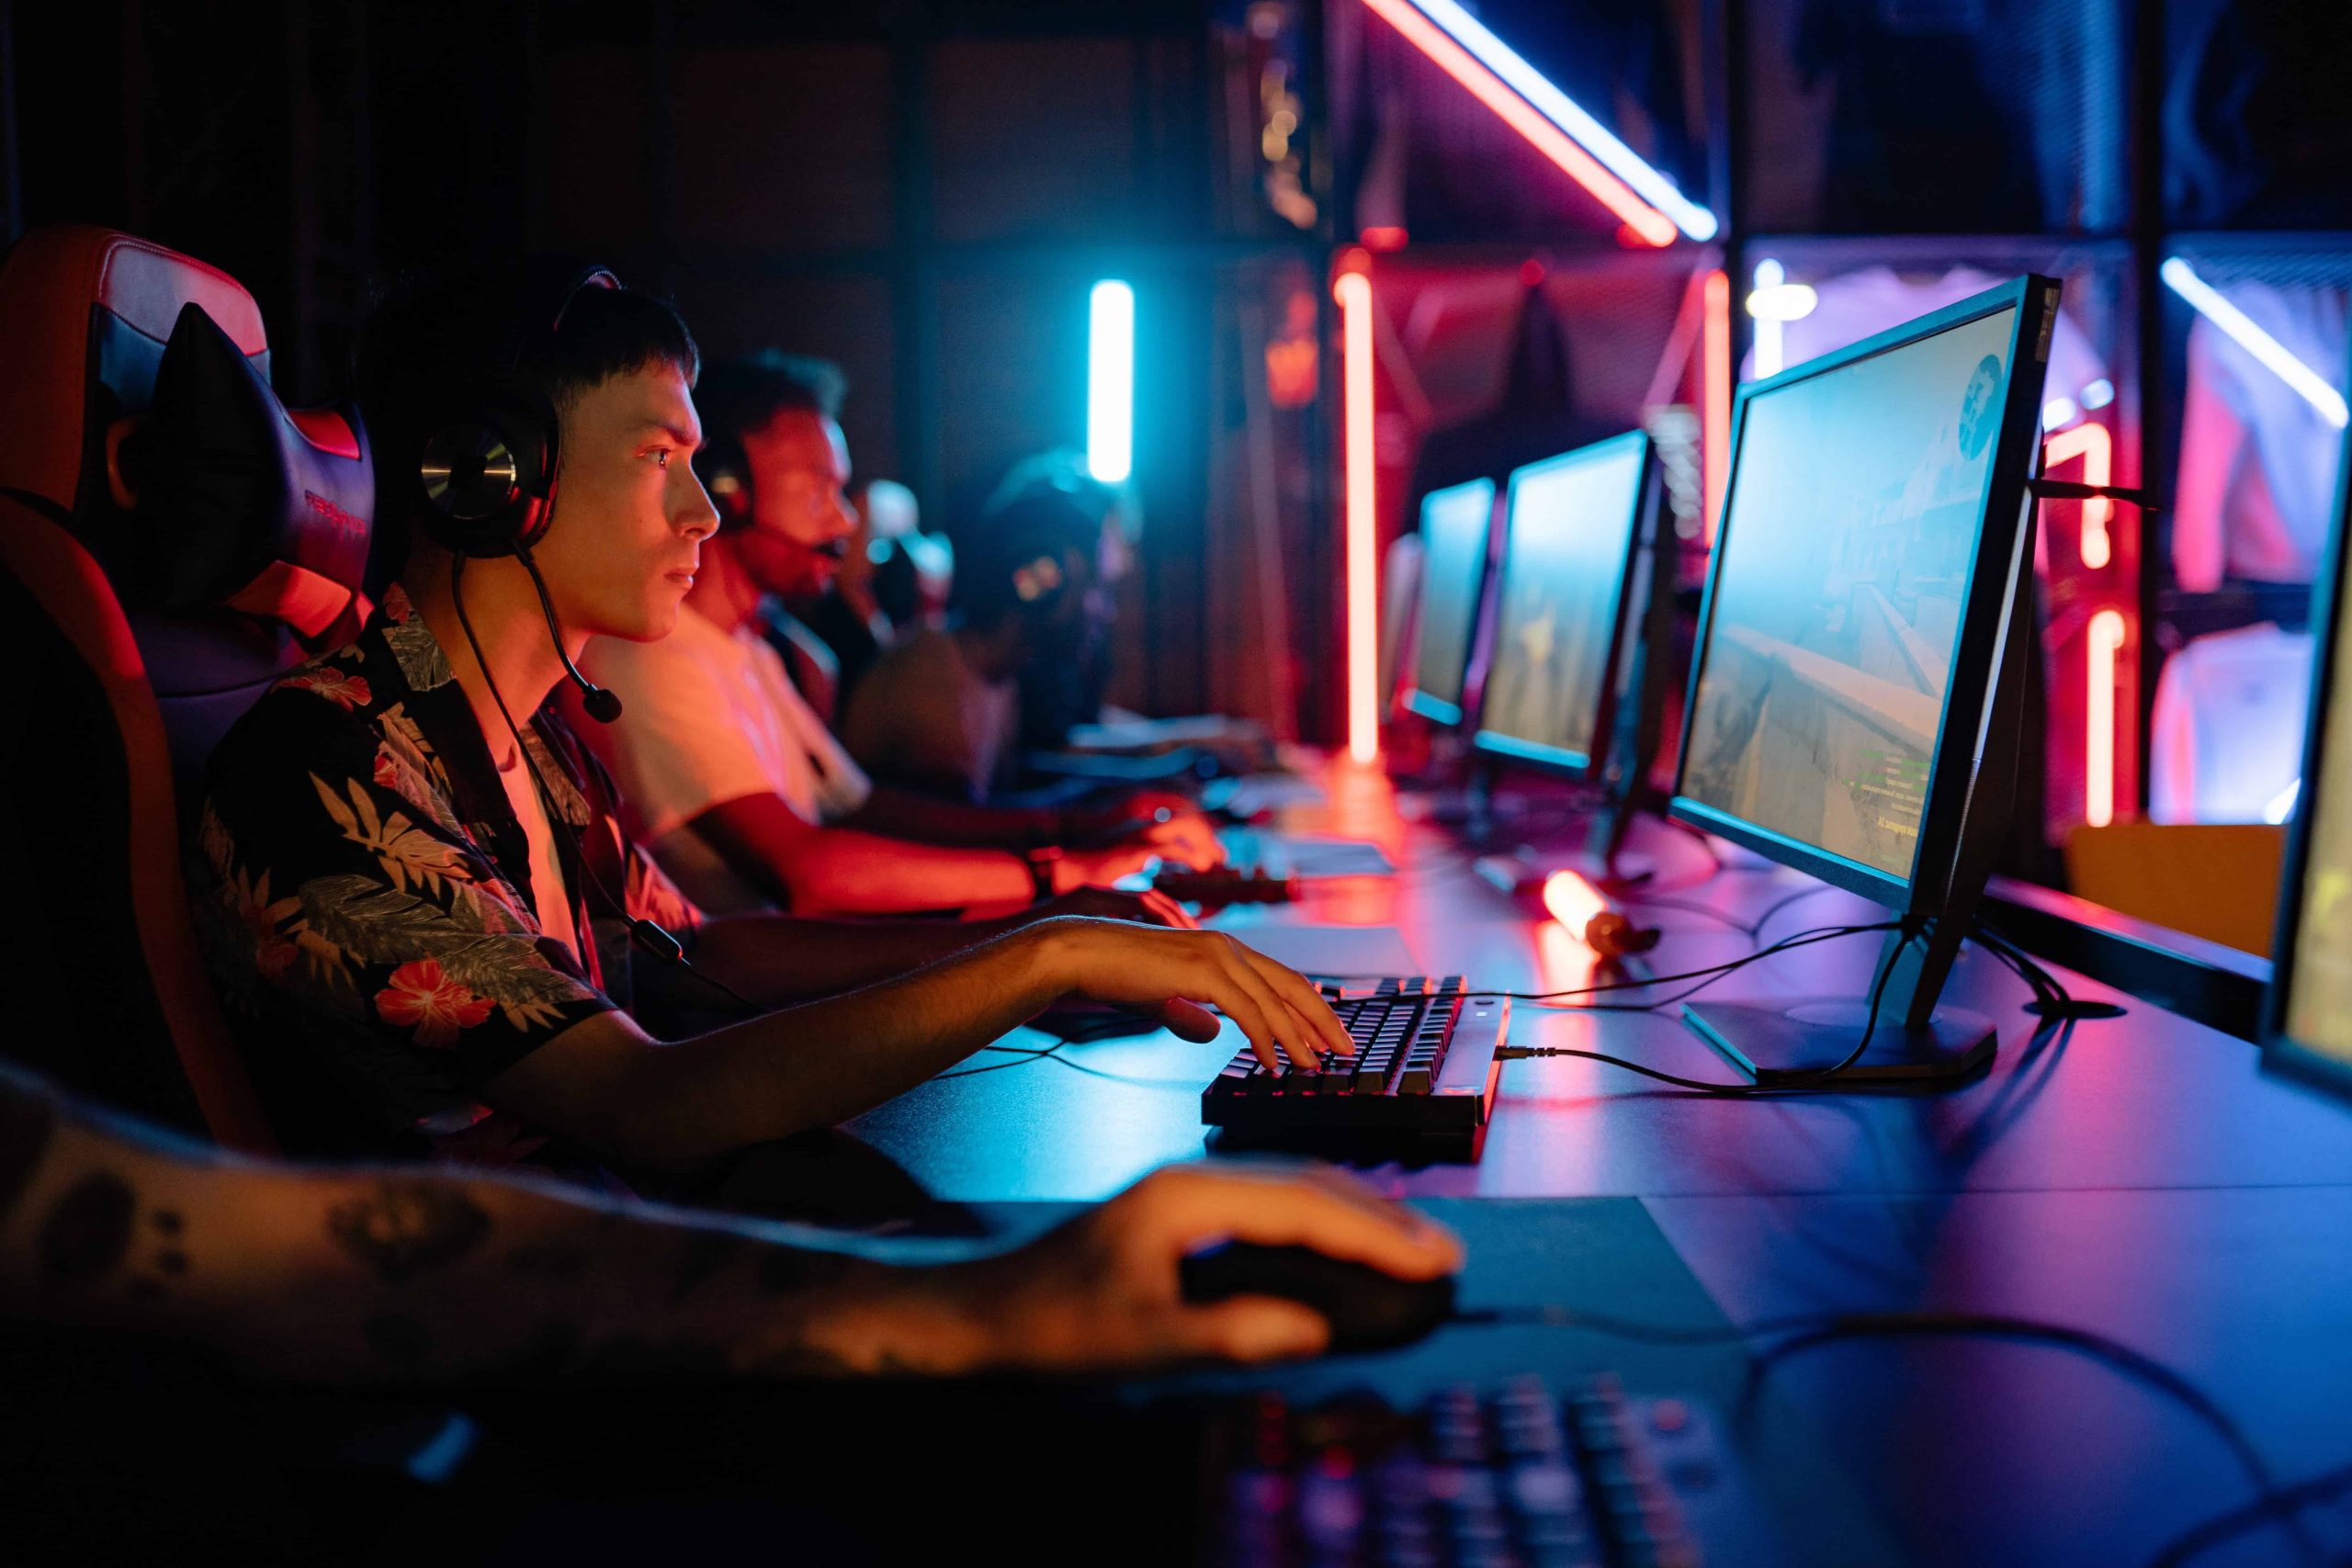 The Fundamentals of Gaming & Esports [EIC x Playbook Academy]